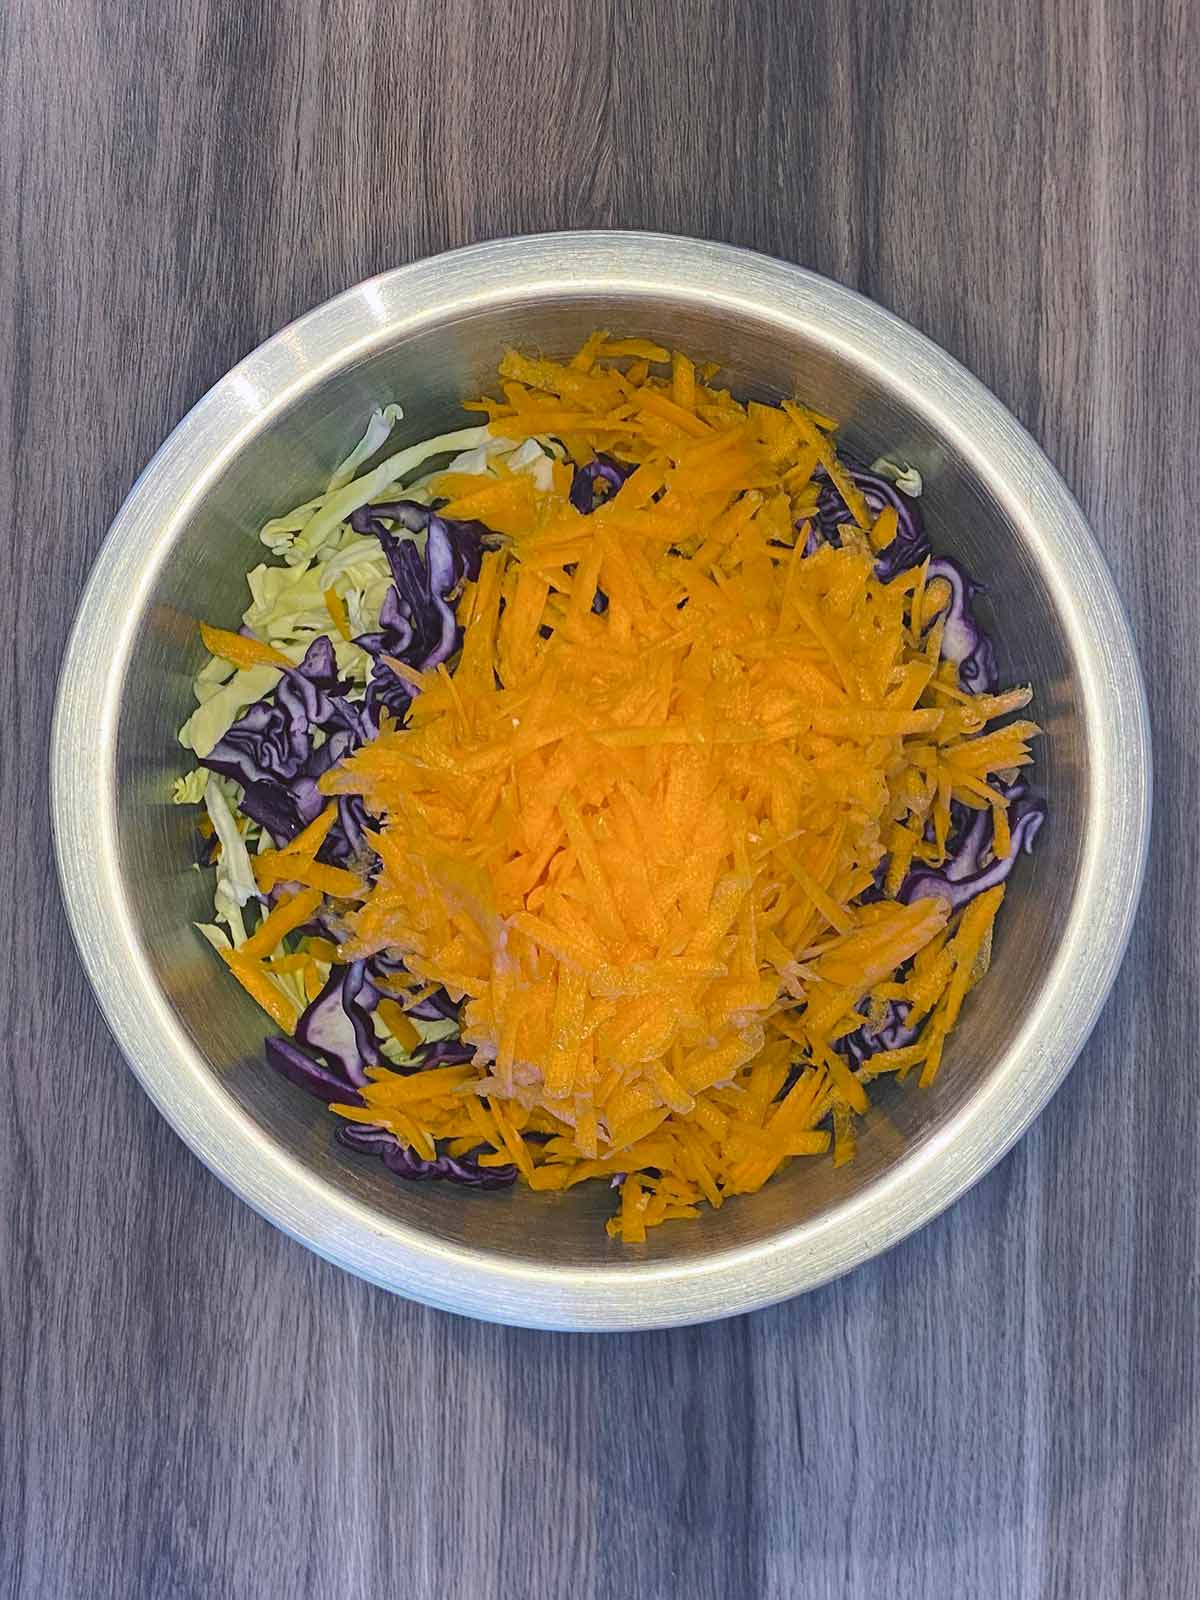 A bowl containing shredded cabbage and carrot.